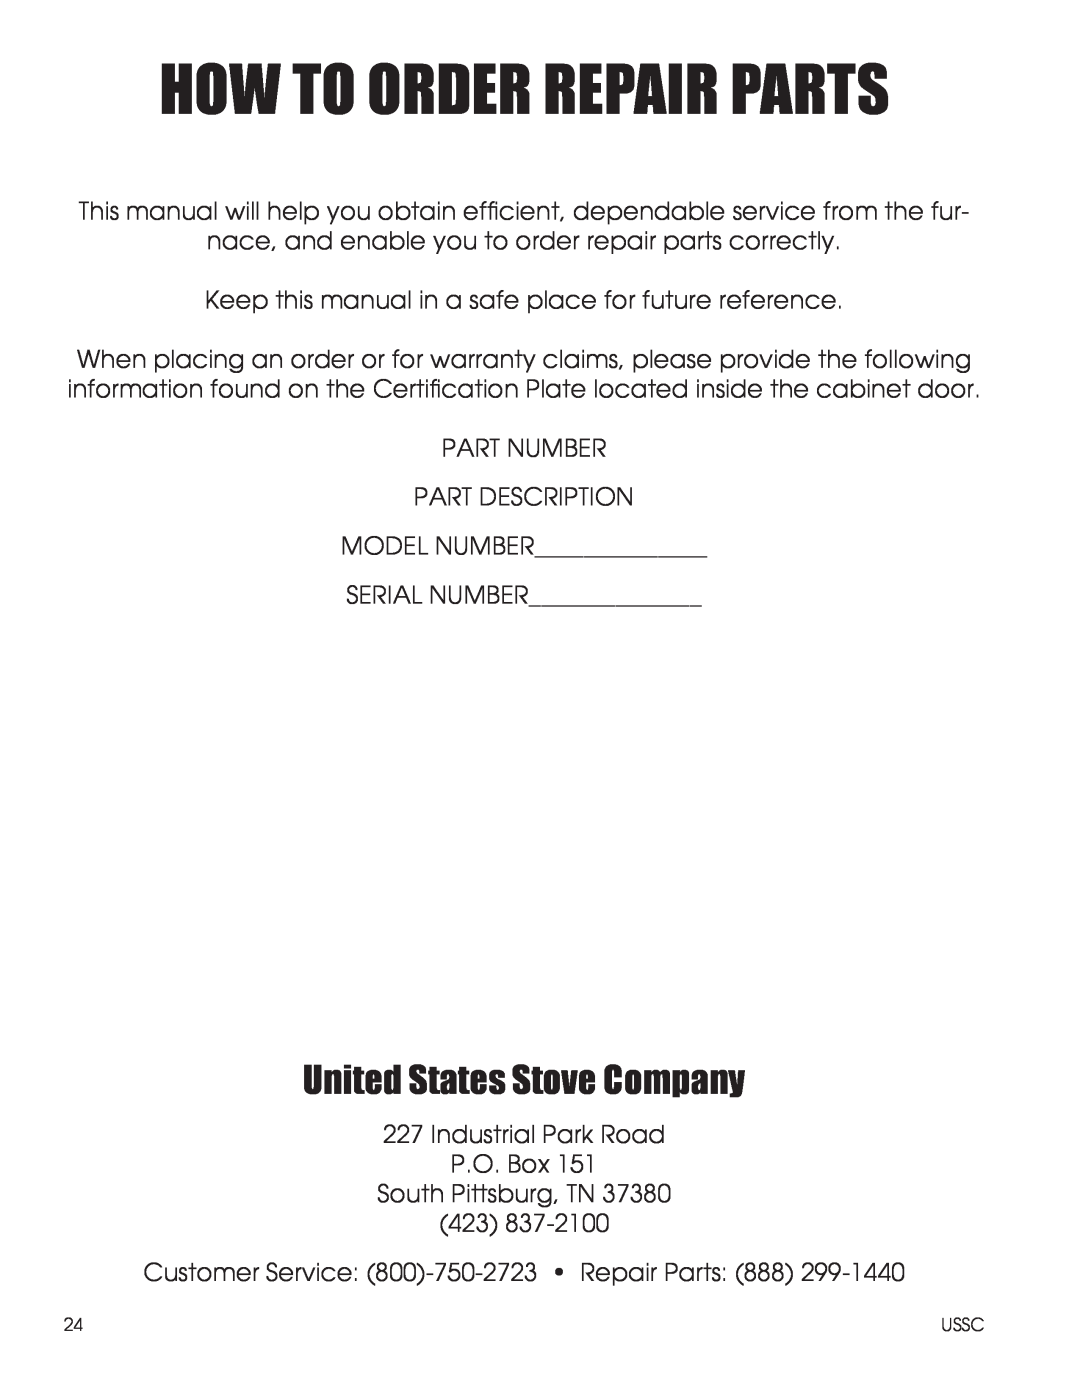 United States Stove 1600EF installation instructions How To Order Repair Parts, United States Stove Company 